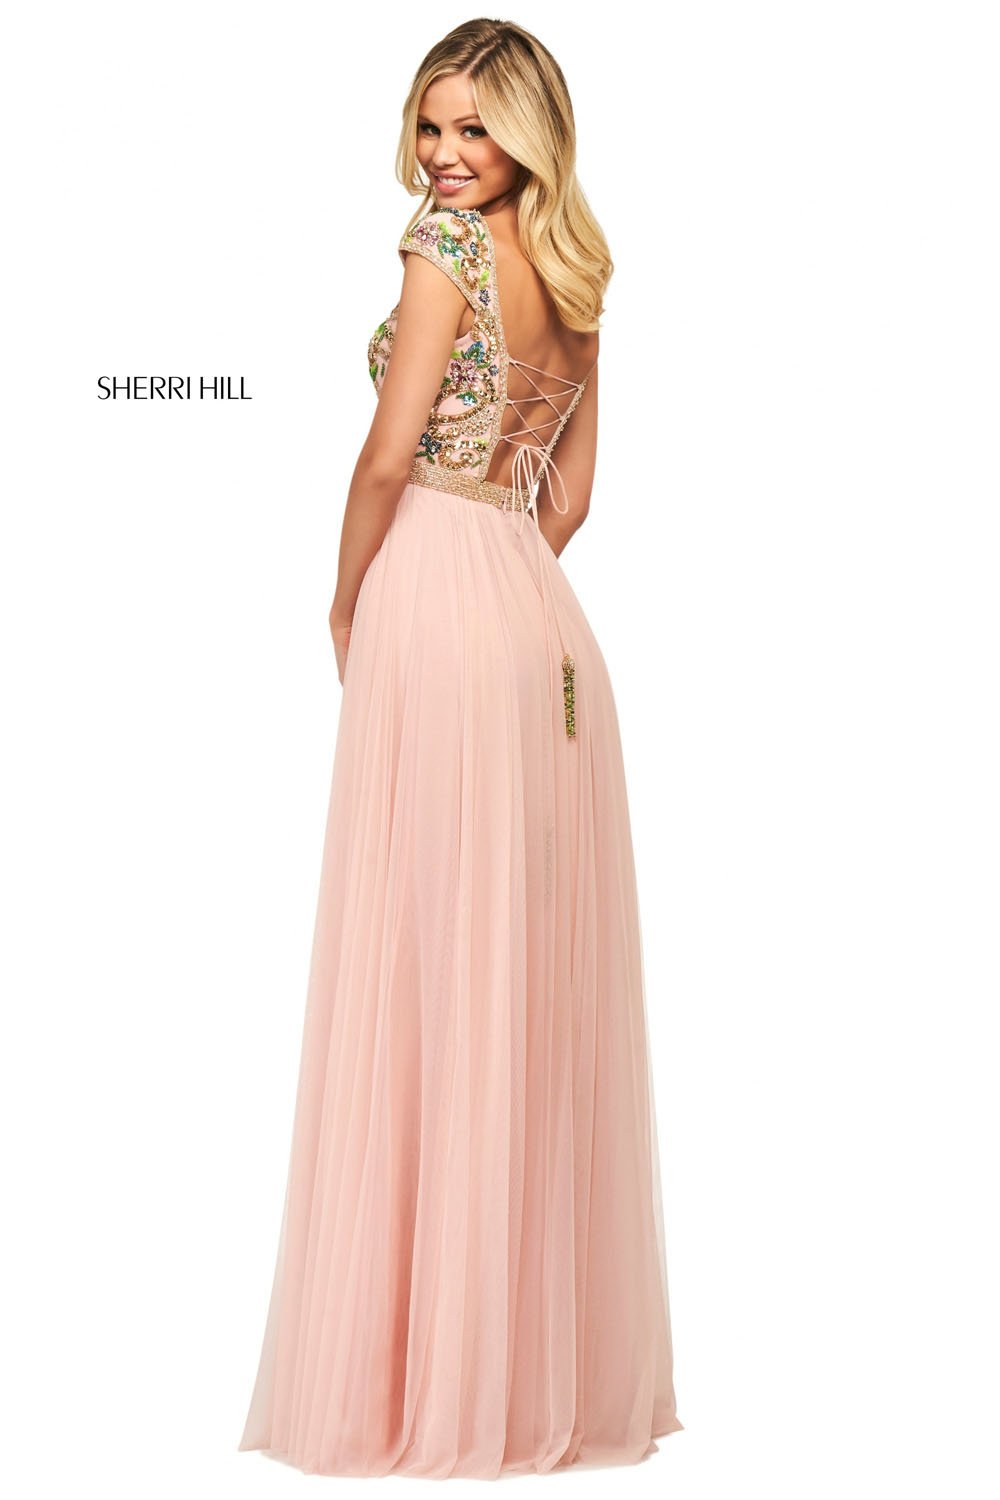 Sherri Hill 53543 dress images in these colors: Blush Multi.